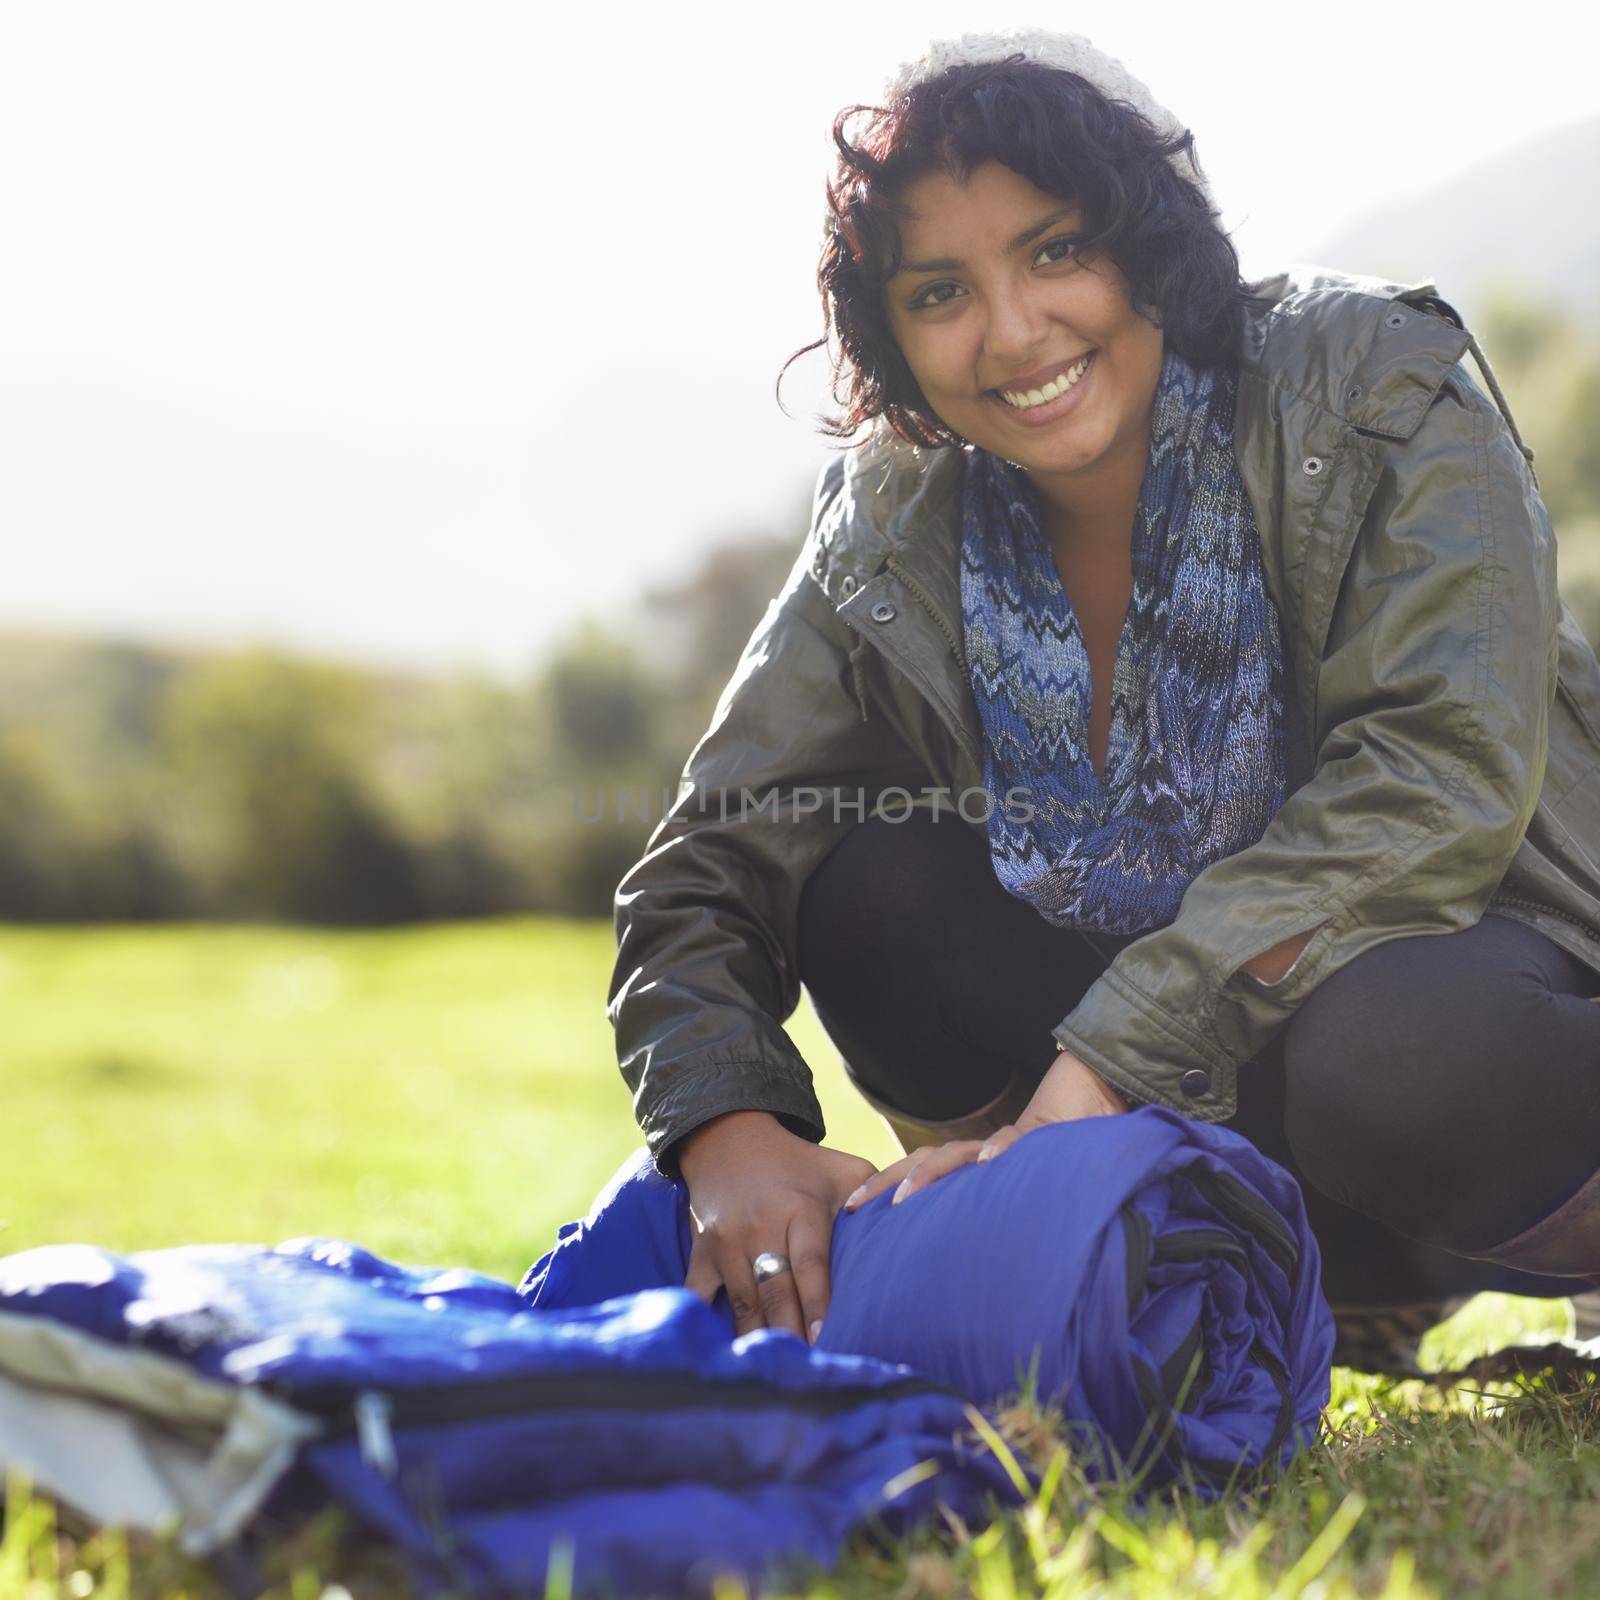 She came prepared to camp. Attractive young woman unrolling a sleeping bag on the grass. by YuriArcurs